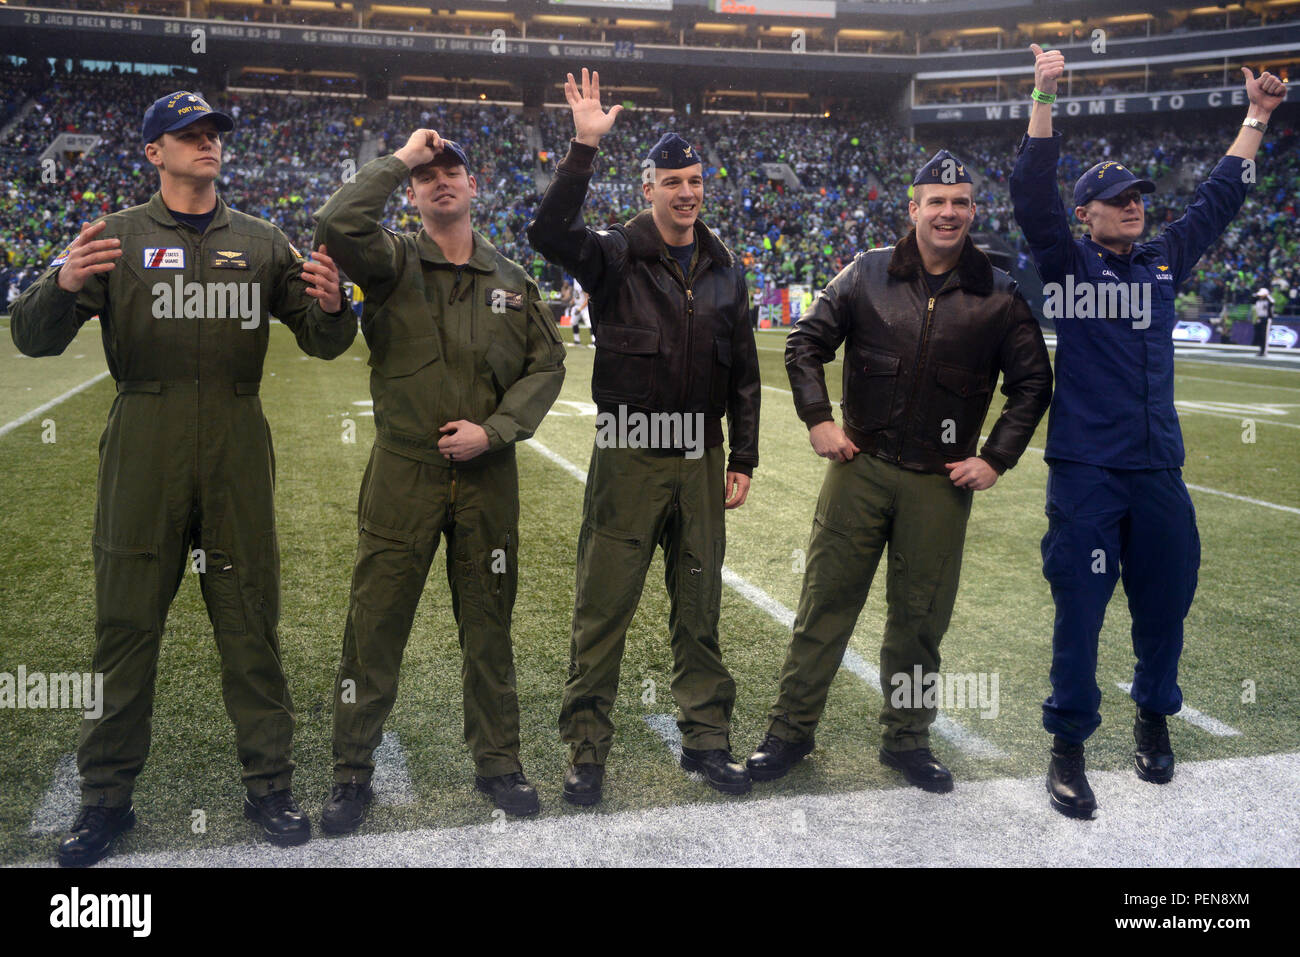 Petty Officer 2nd Class Andrew Johnston, Petty Officer 2nd Class Bryan McCarthy, Lt. Jared Hylander, Lt. Jake Marks and Lt. Cmdr. Matt Calvert, MH-65 Dolphin helicopter crewmen from Coast Guard Air Station Port Angeles, Wash., rally Seahawks fans from the CenturyLink field in Seattle during a Seattle Seahawks game Dec. 27, 2015. The crews did a flyover in two Dolphin helicopters before the game during the singing of the National Anthem while members from the Coast Guard and other military branches presented the American flag on the field. (U.S. Coast Guard photo by Seaman Sarah Wilson) Stock Photo